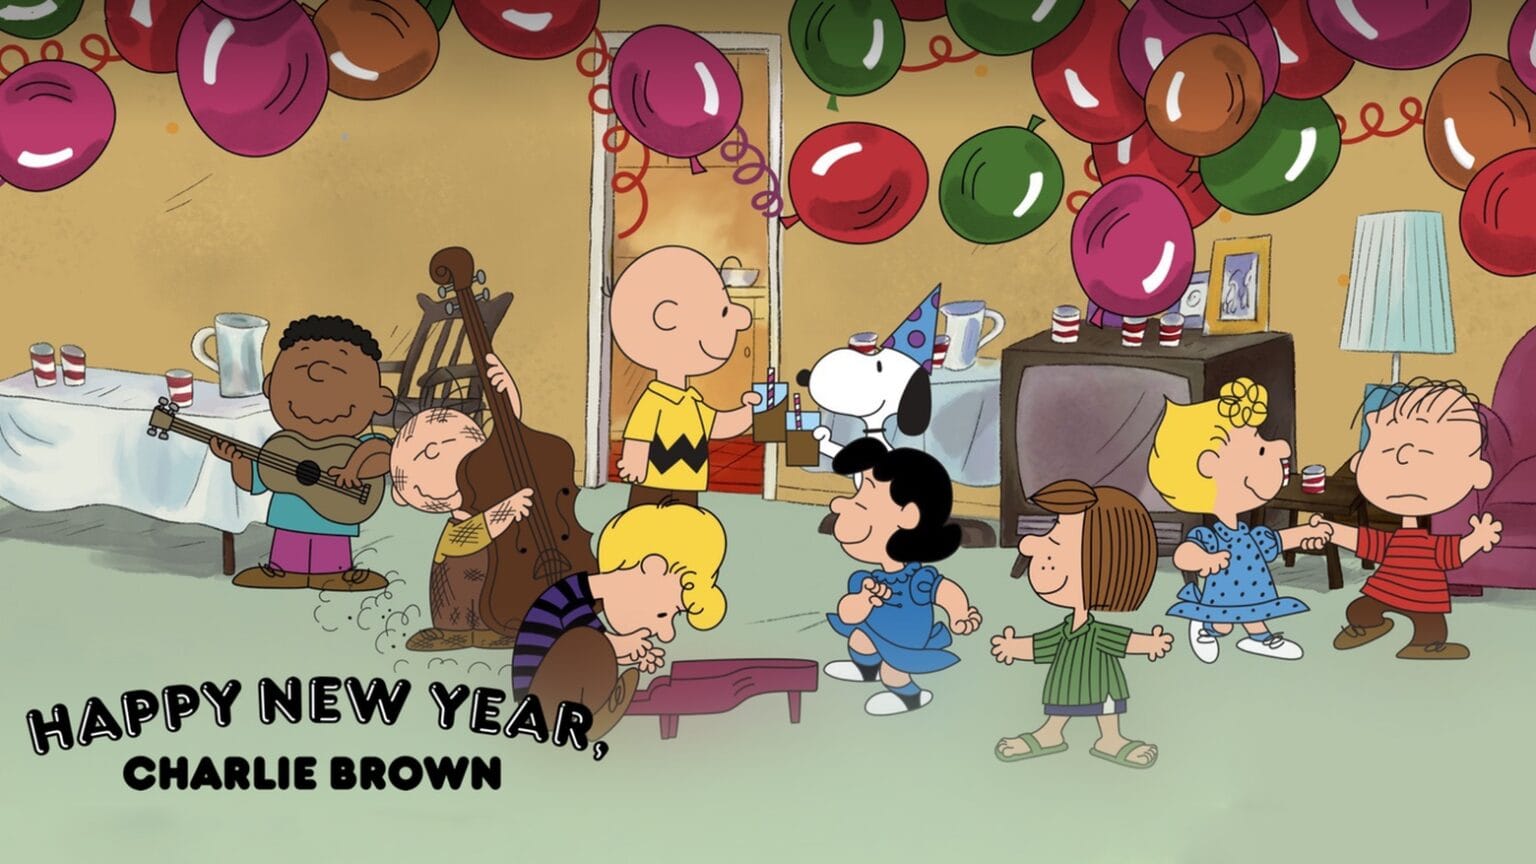 The Peanuts New Year‘s Eve special is now on Apple TV+.